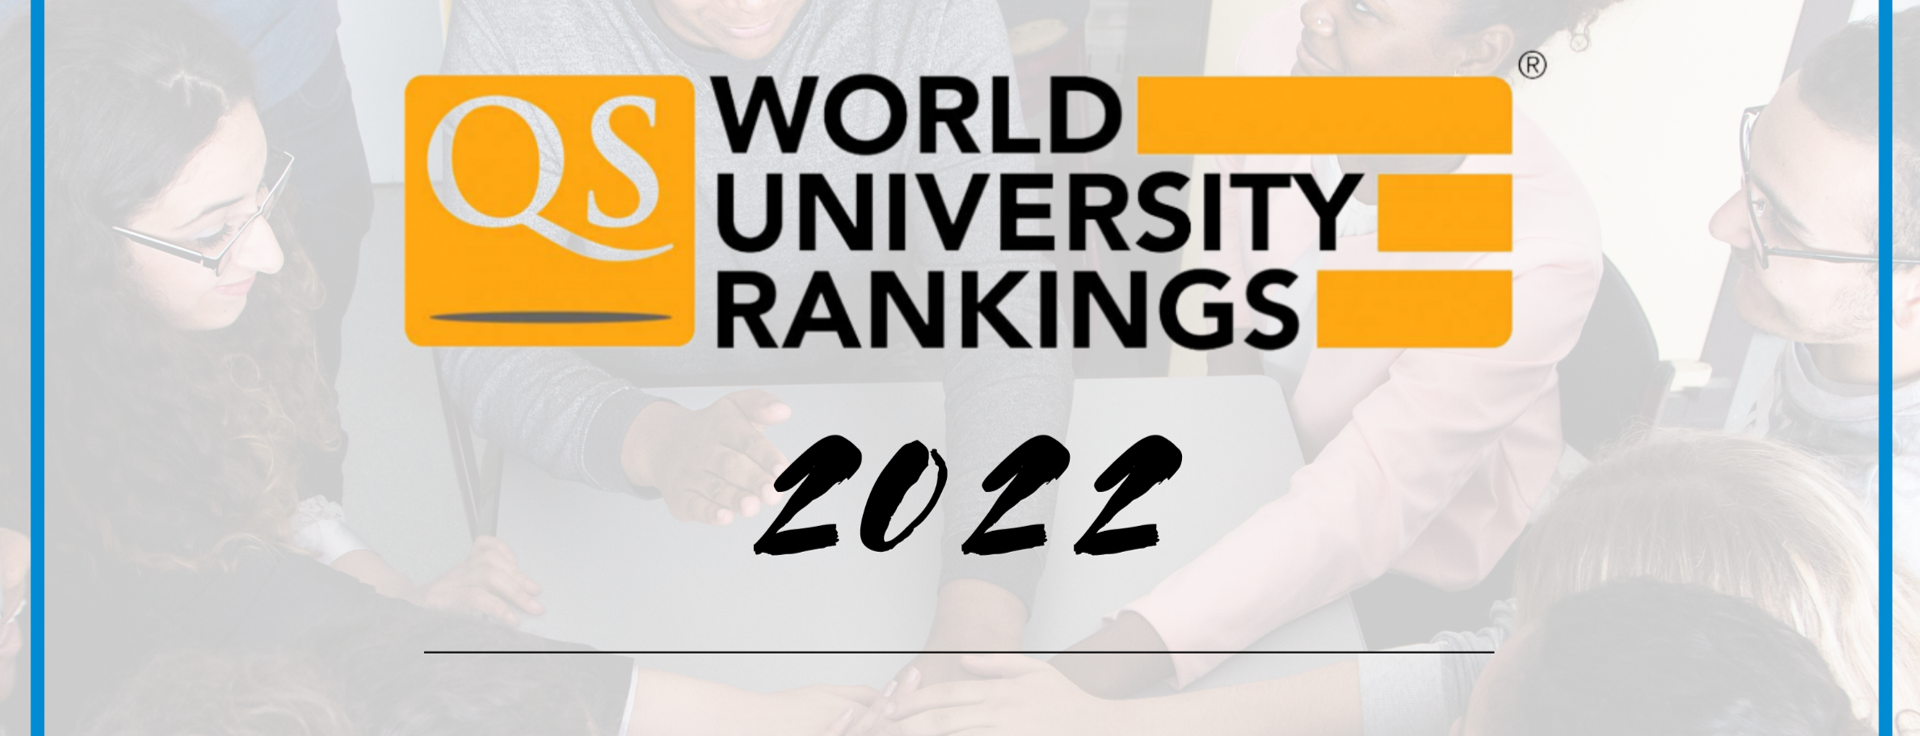 IP Paris in the Top 50 best universities worldwide for its first ranking QS World University Ranking 